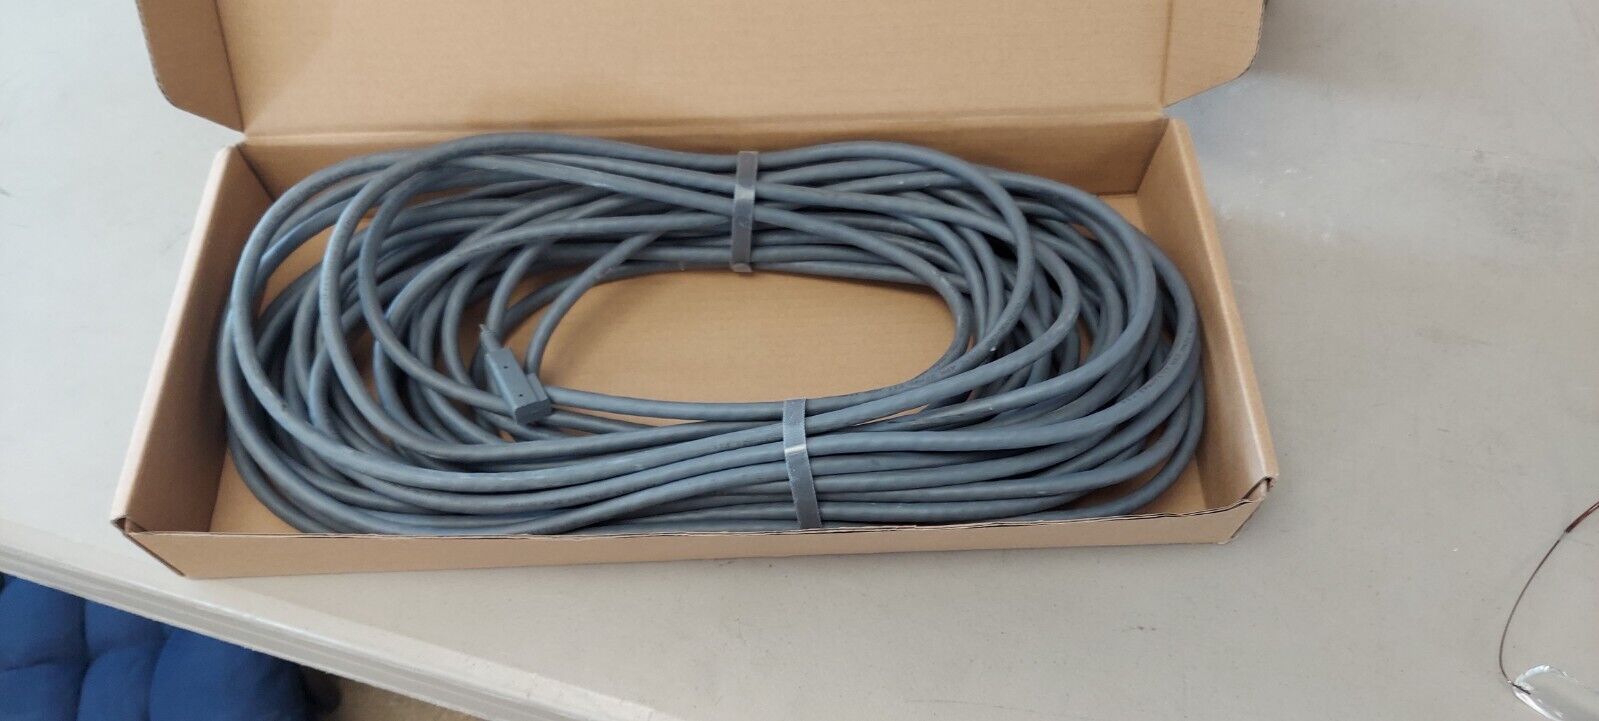 Starlink High Performance 82 feet POE Cable, New In Box, Never Used